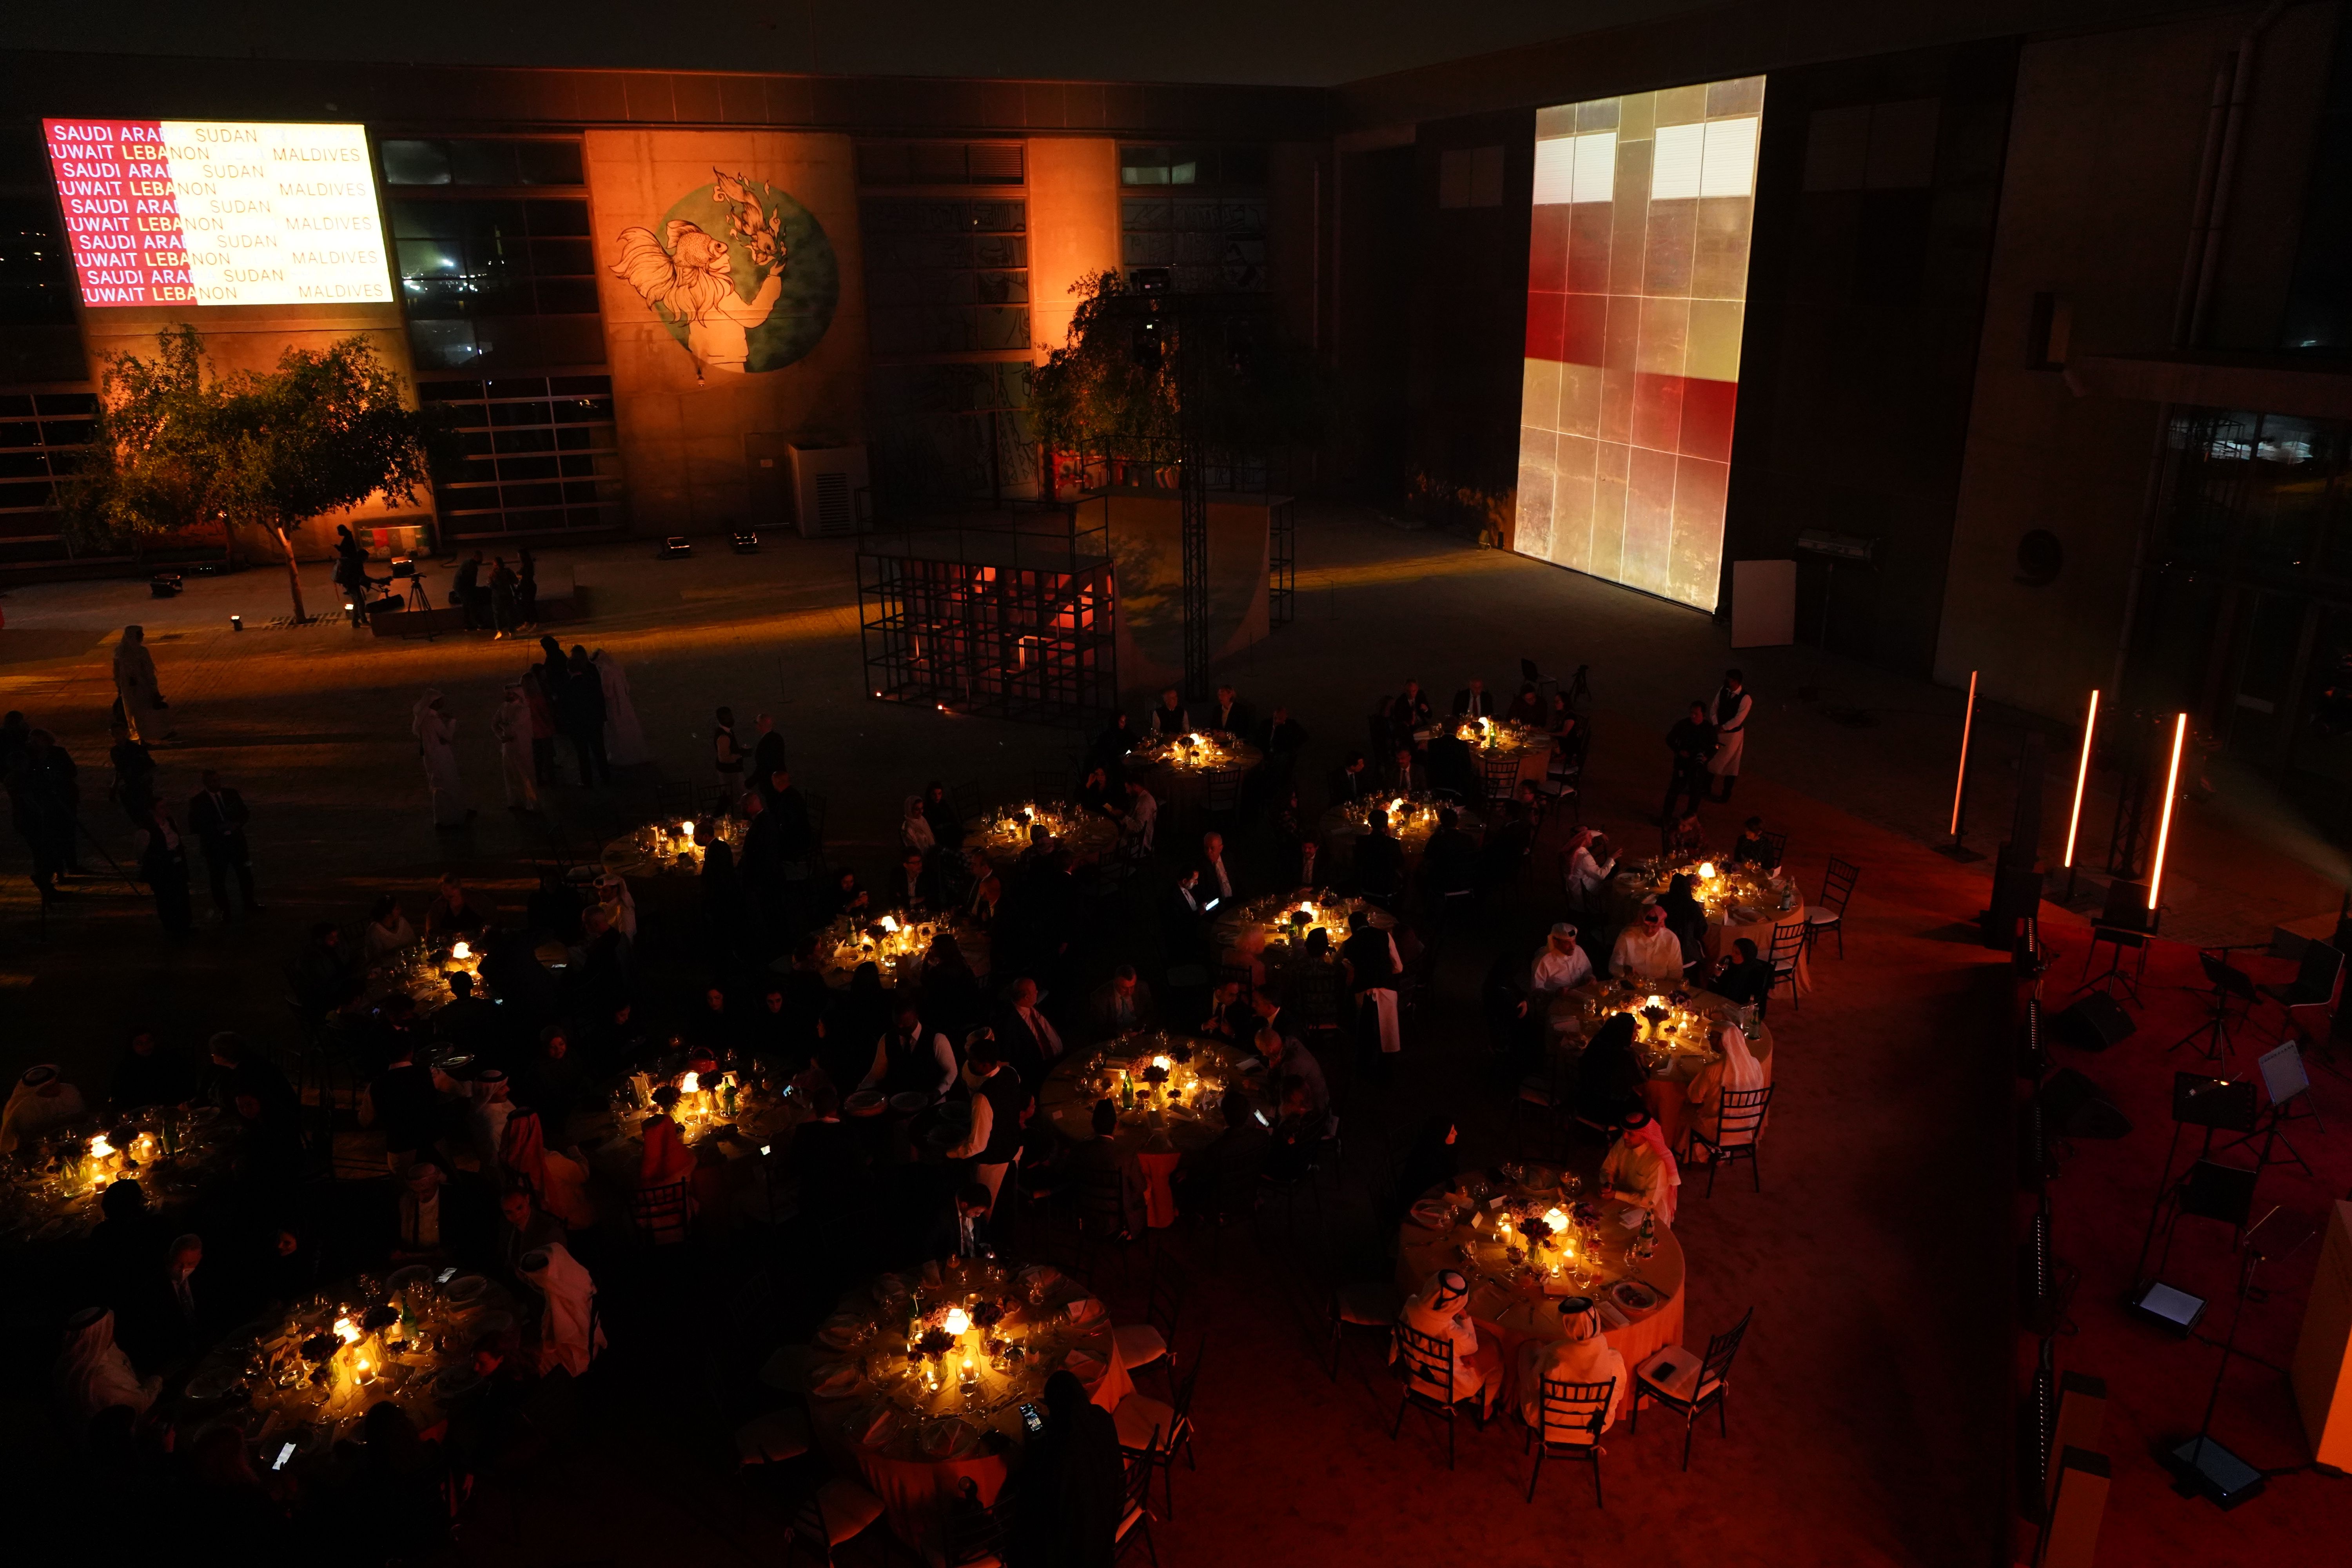 Outdoor courtyard of the Fire Station at night, set up with round tables for a formal dinner.